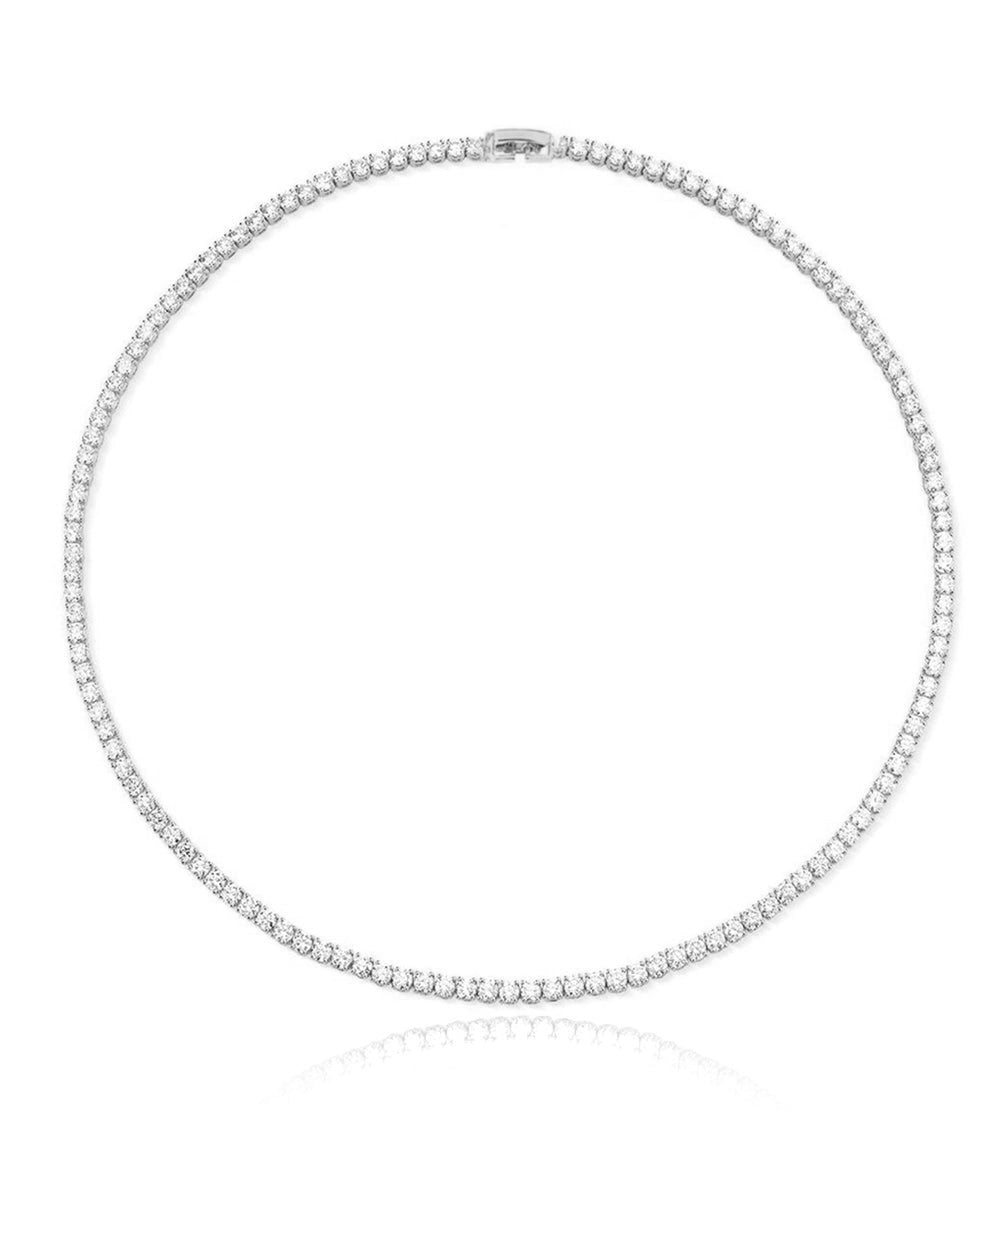 BABY TENNIS CZ NECKLACE - 3 mm Silver - ACID ROSE JEWELRY